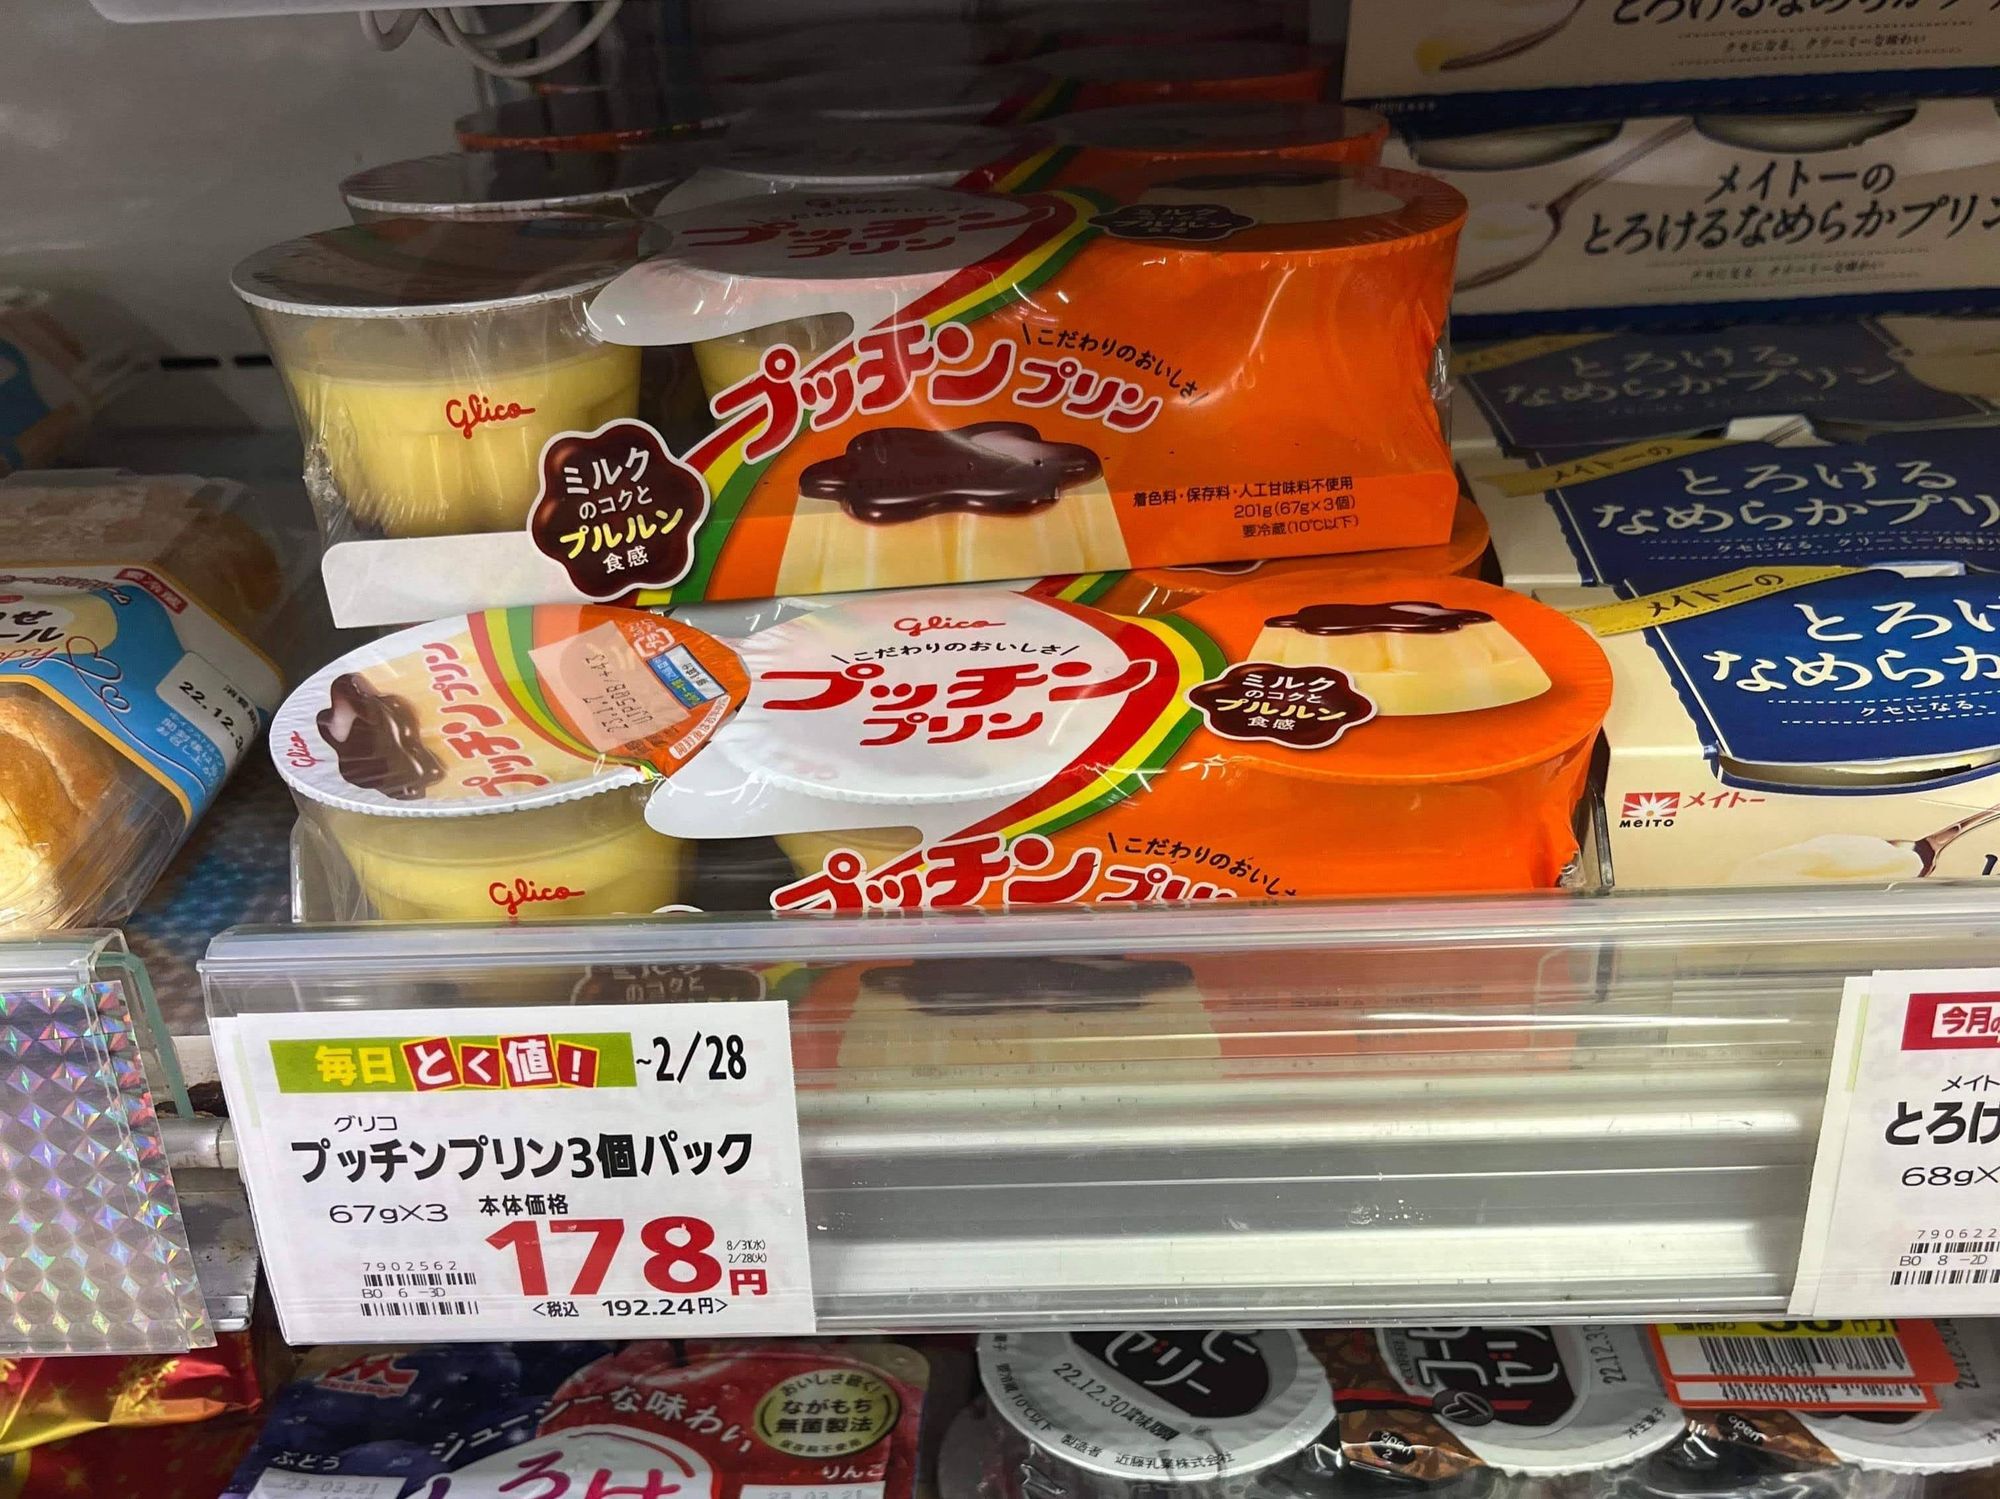 The mystery behind why Japan sells pudding in 3-packs and yogurt in 4-packs